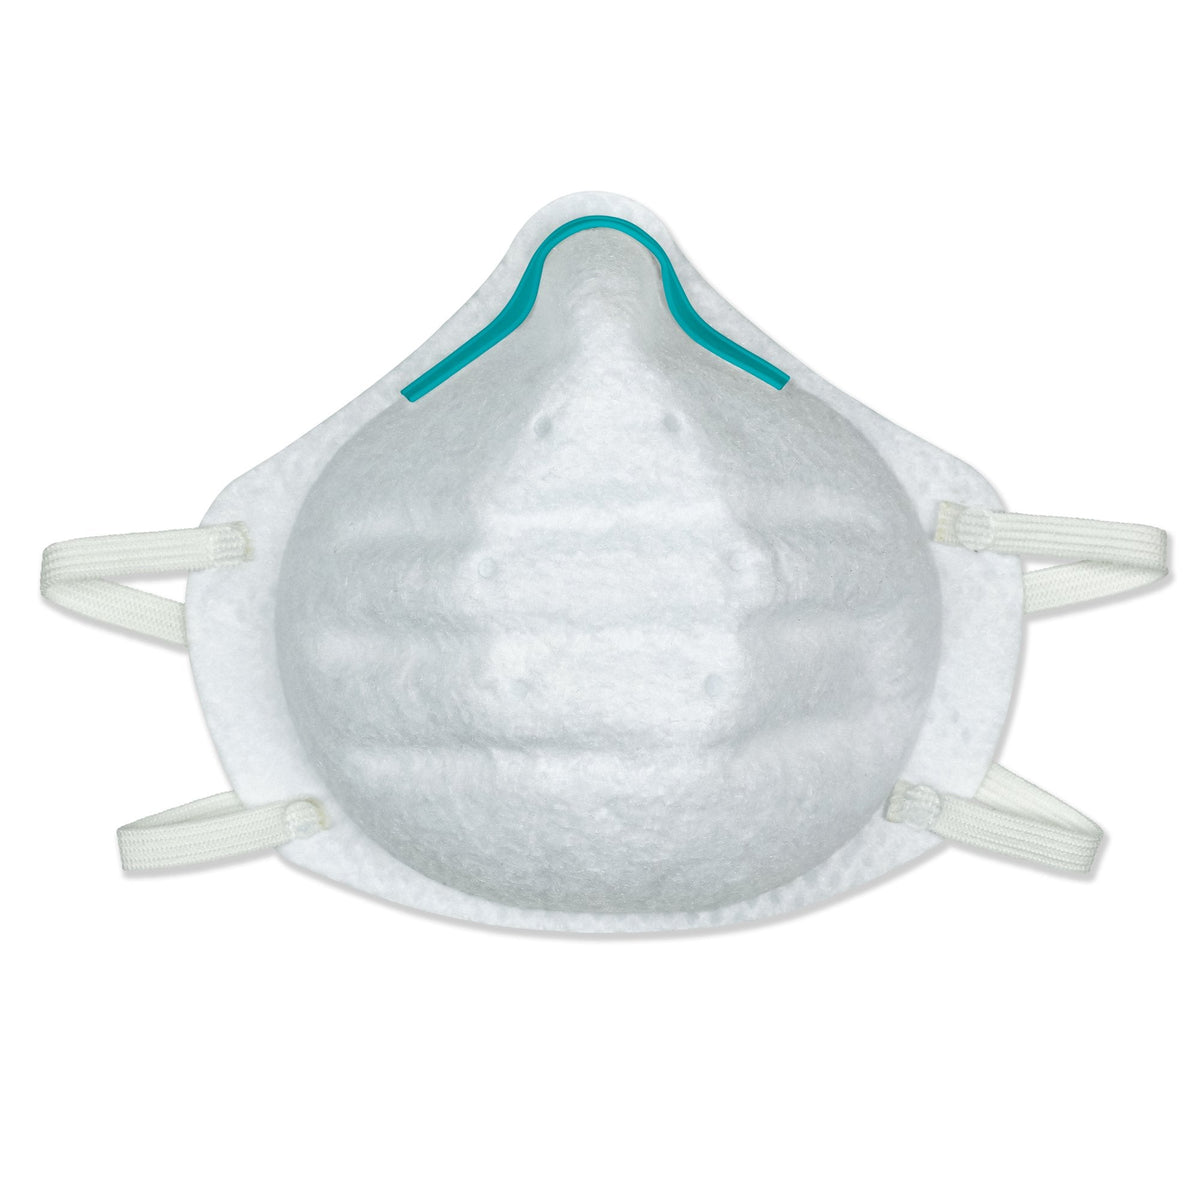 Honeywell Medical N95 Mask - White, One Size Fits Most - American Hospital Supply